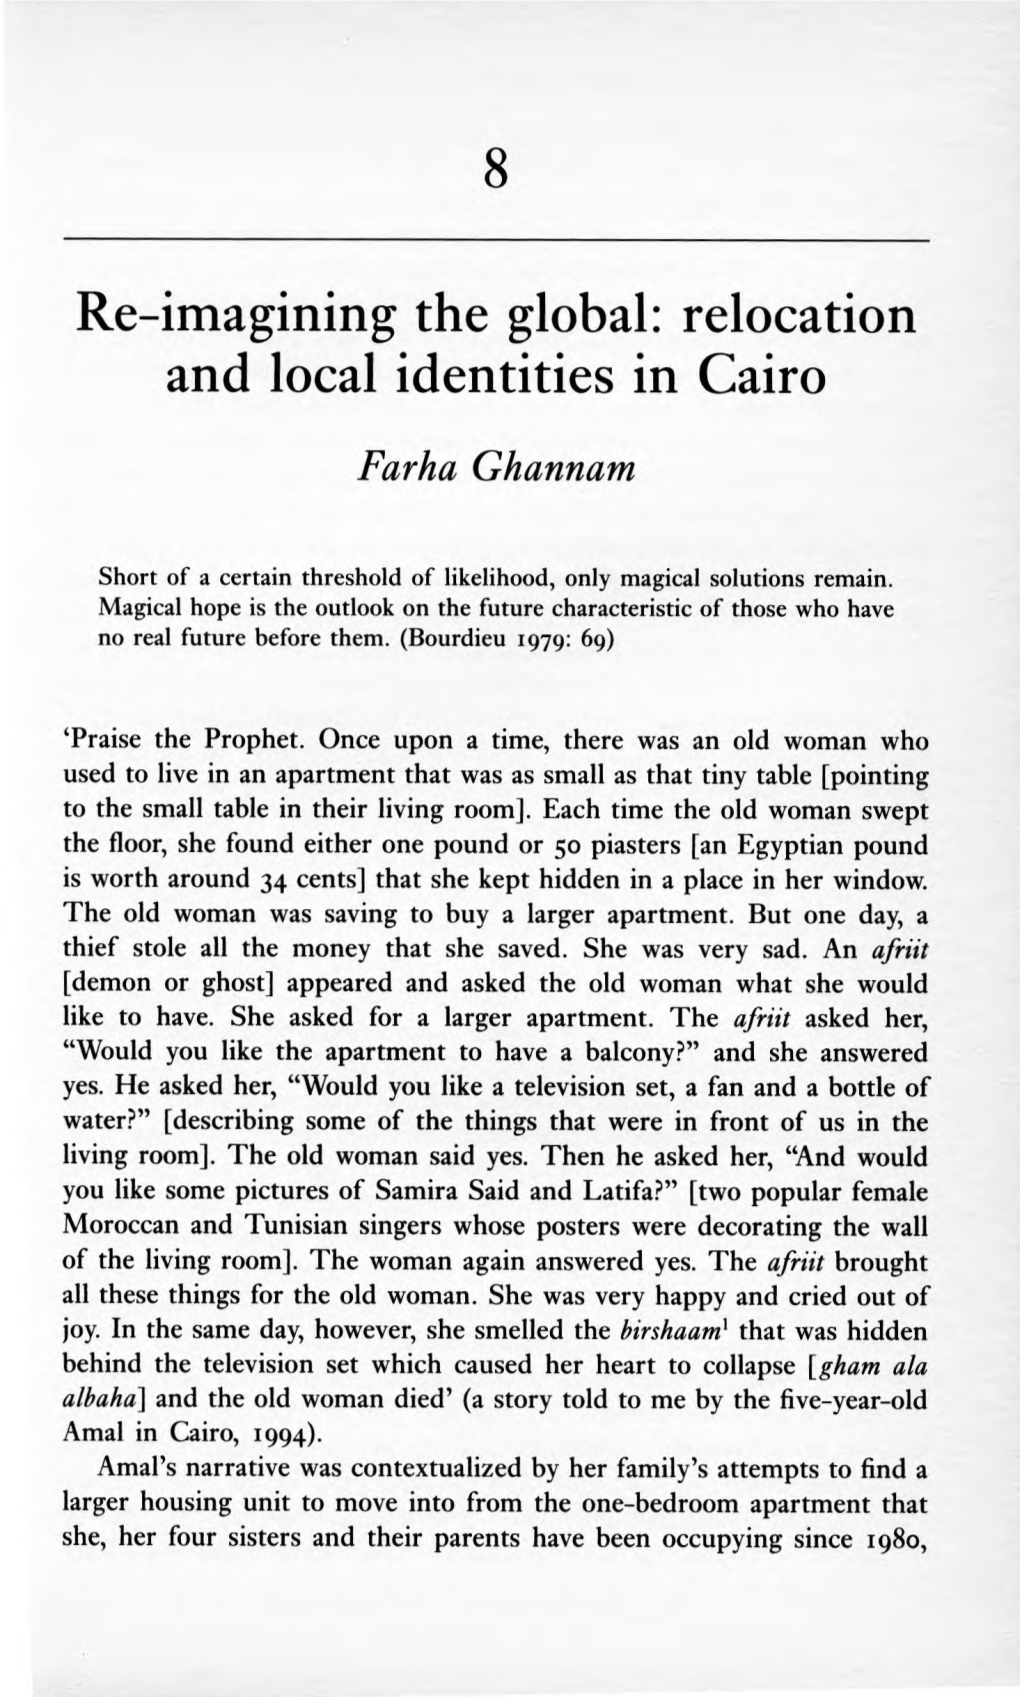 Re-Imagining the Global: Relocation and Local Identities in Cairo